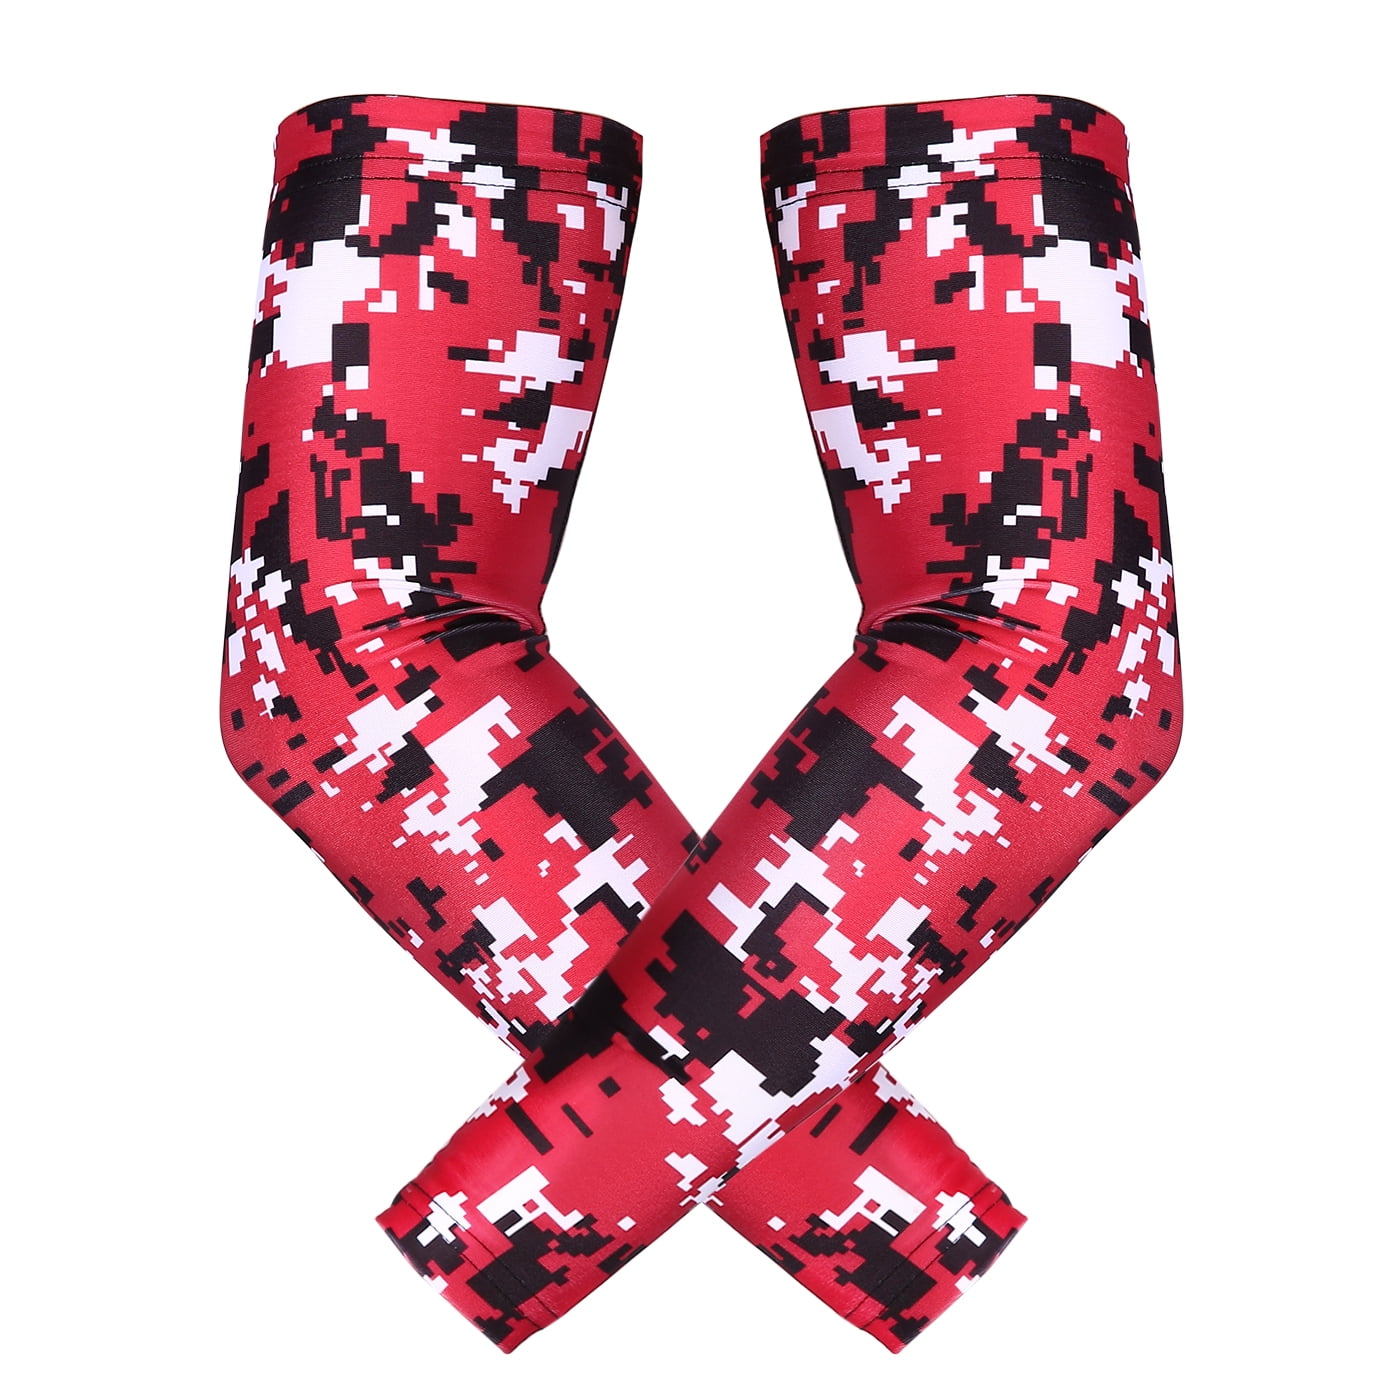 Details about   NEW Basketball Compression Sports Arm Sleeve Lightning Camo Football Baseball 